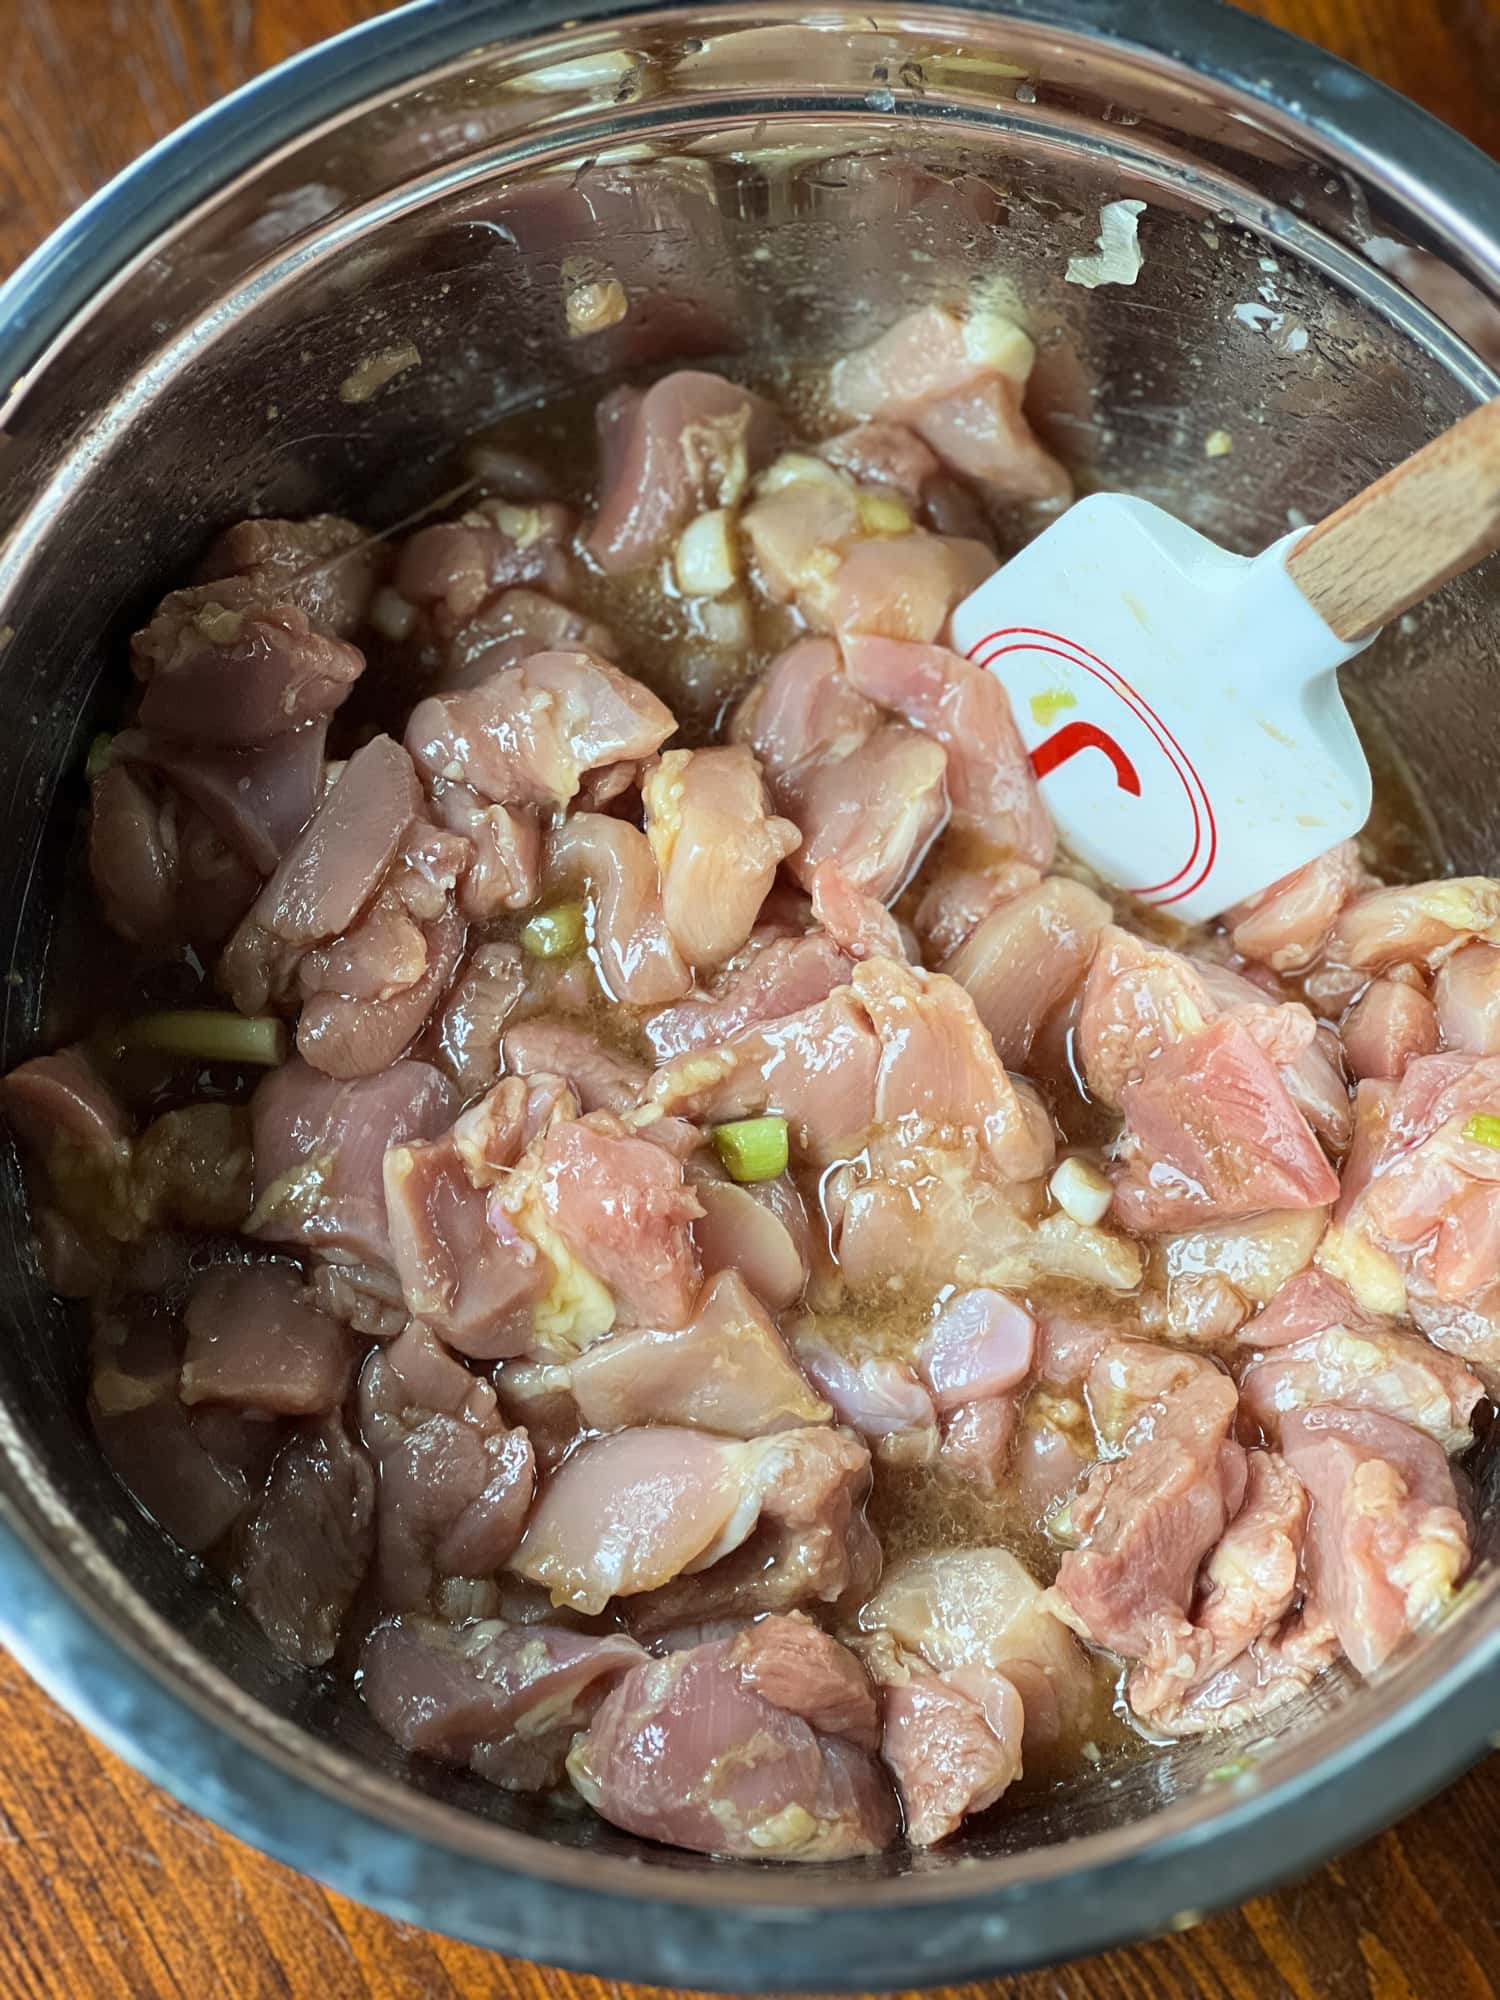 Uncooked chicken thigh pieces are stirred into a bowl of ginger-soy marinade.